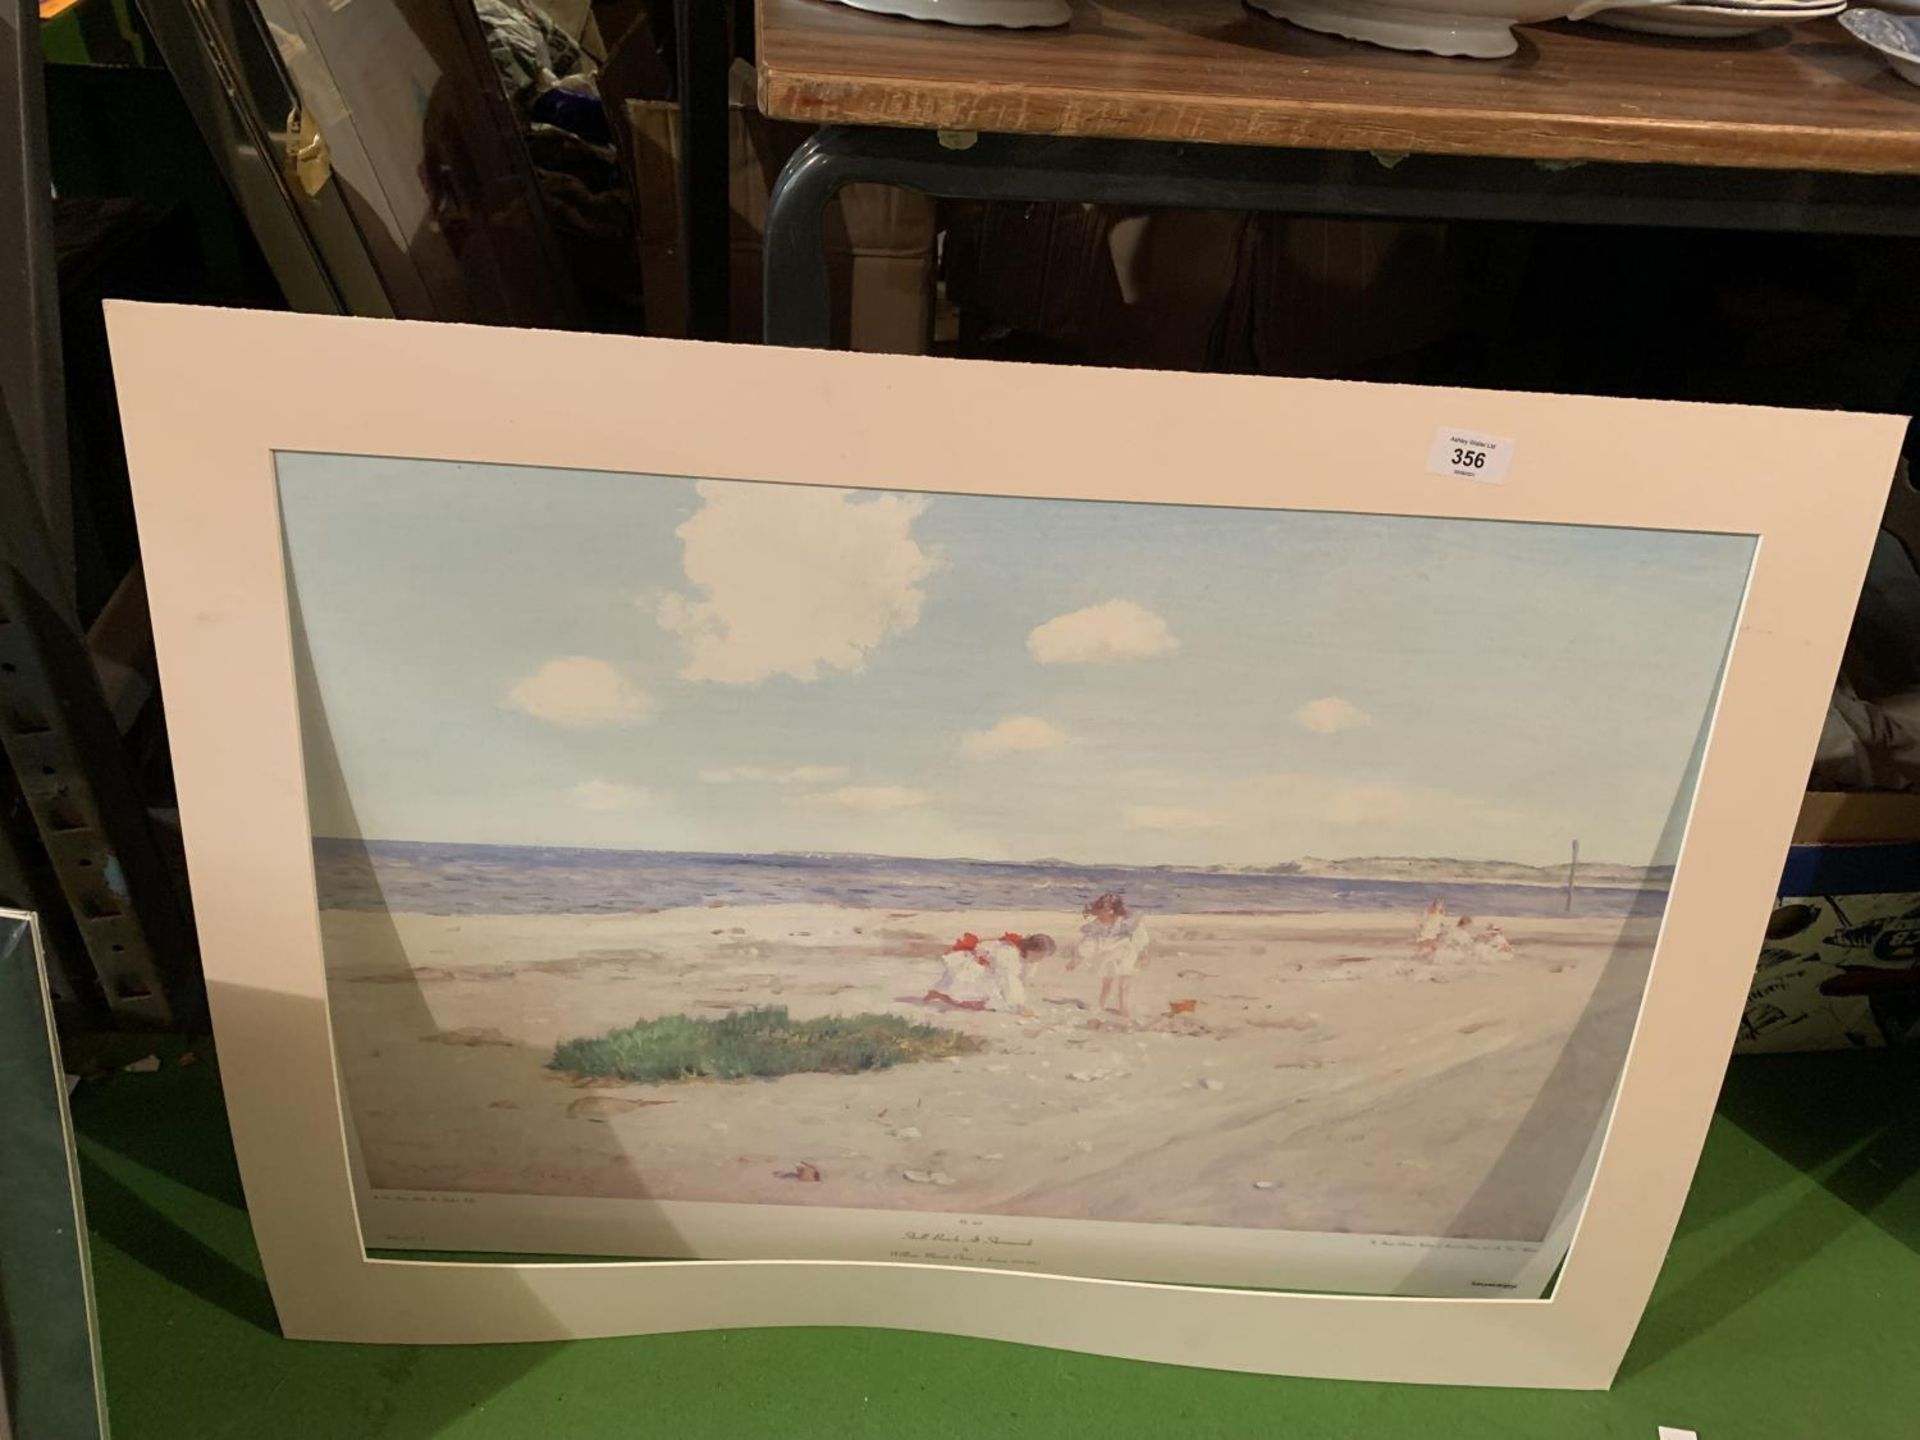 A LARGE PRINT OF SHELL BEACH AT SHINNECOCK